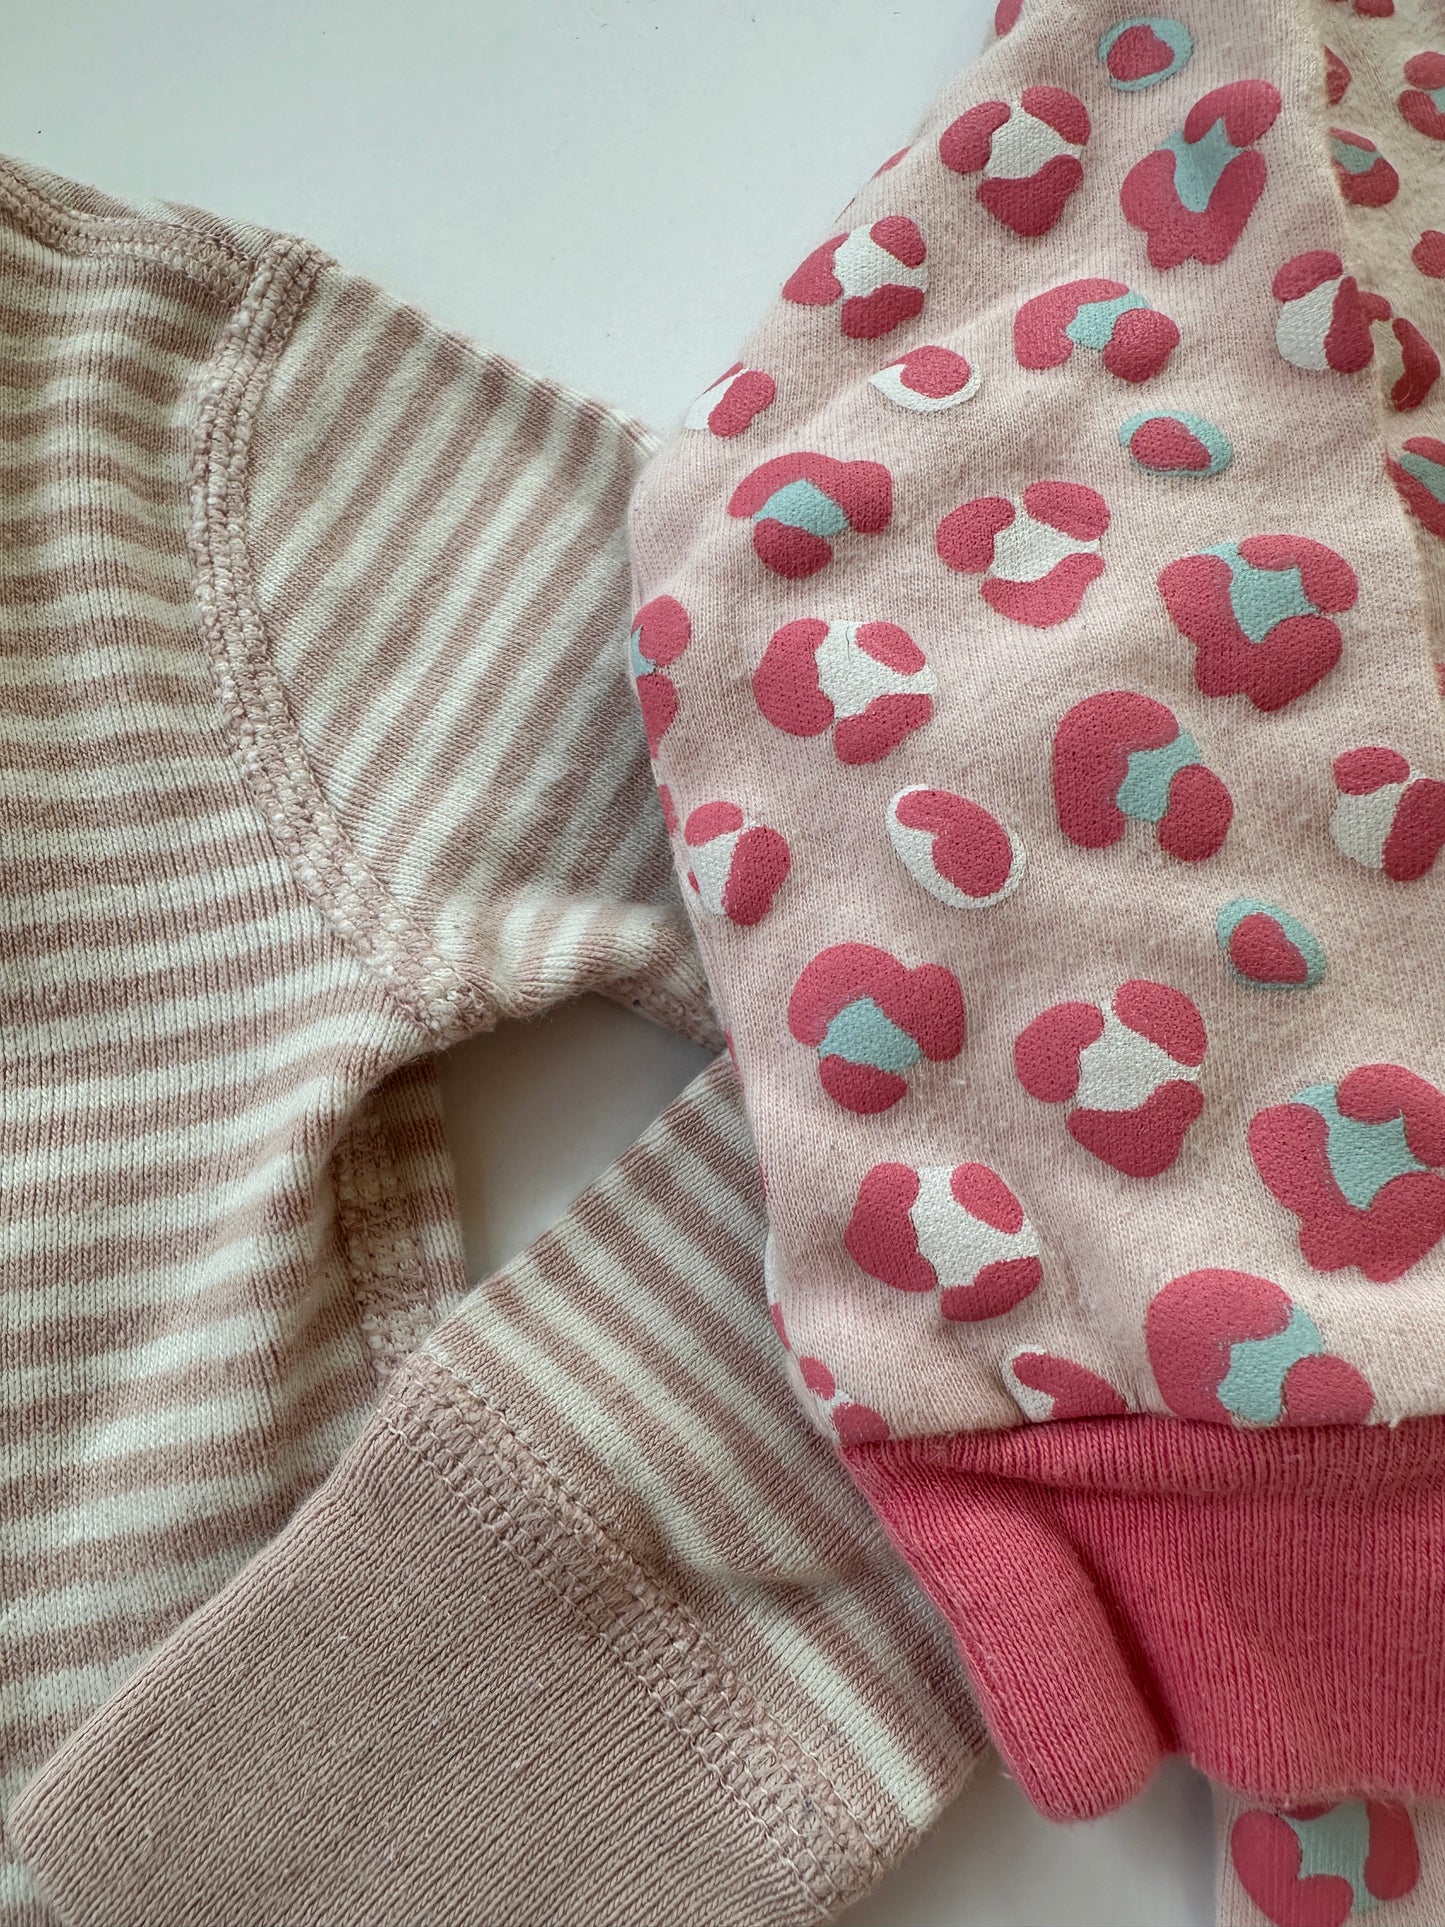 Girl 12-18 months Hanna Andersson blush pink/white strip and Tucker & Tate pink leopard print sleepers pajamas